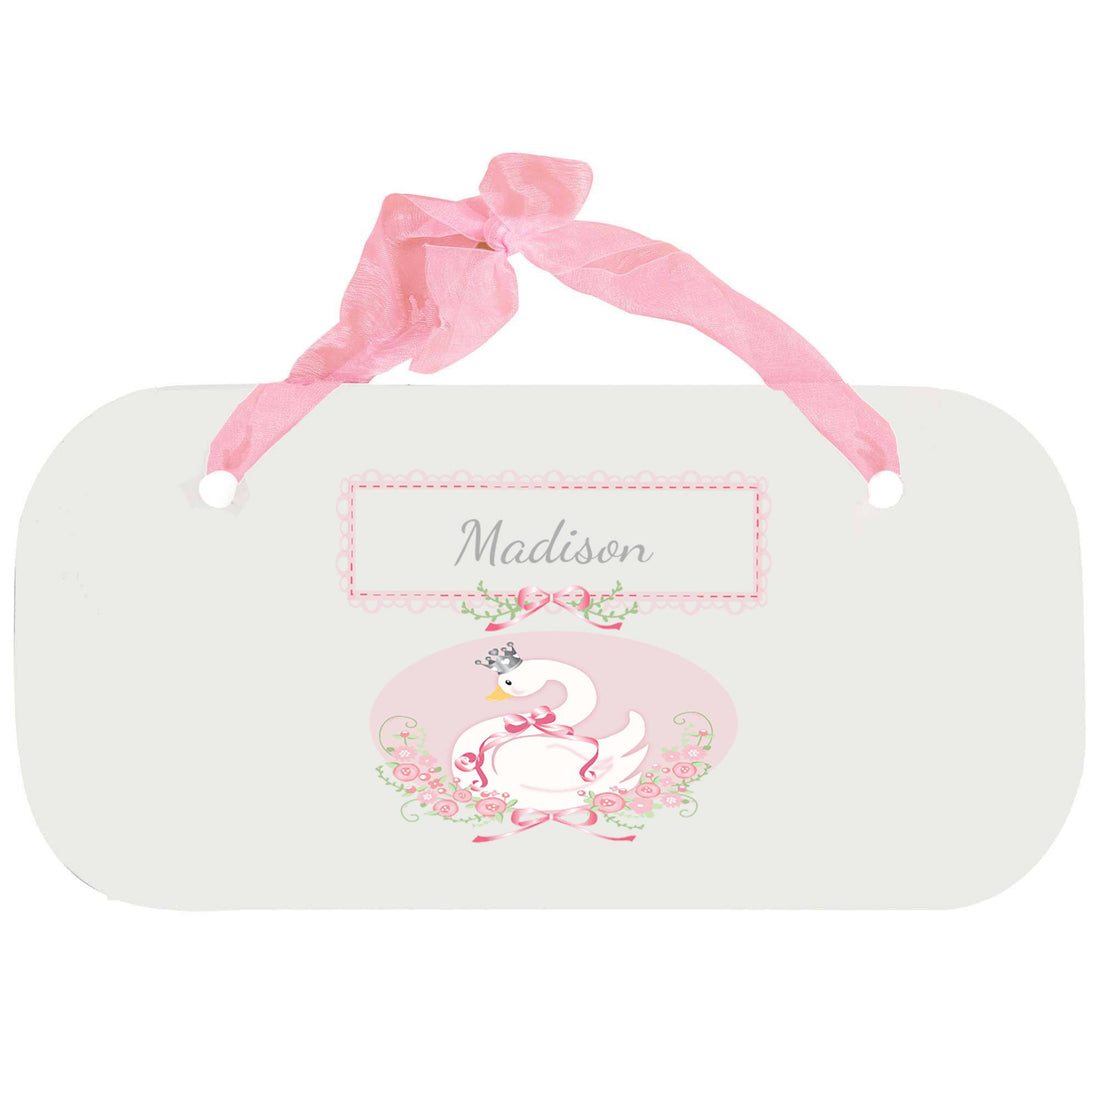 Personalized Girls Wall Plaque with Swan design